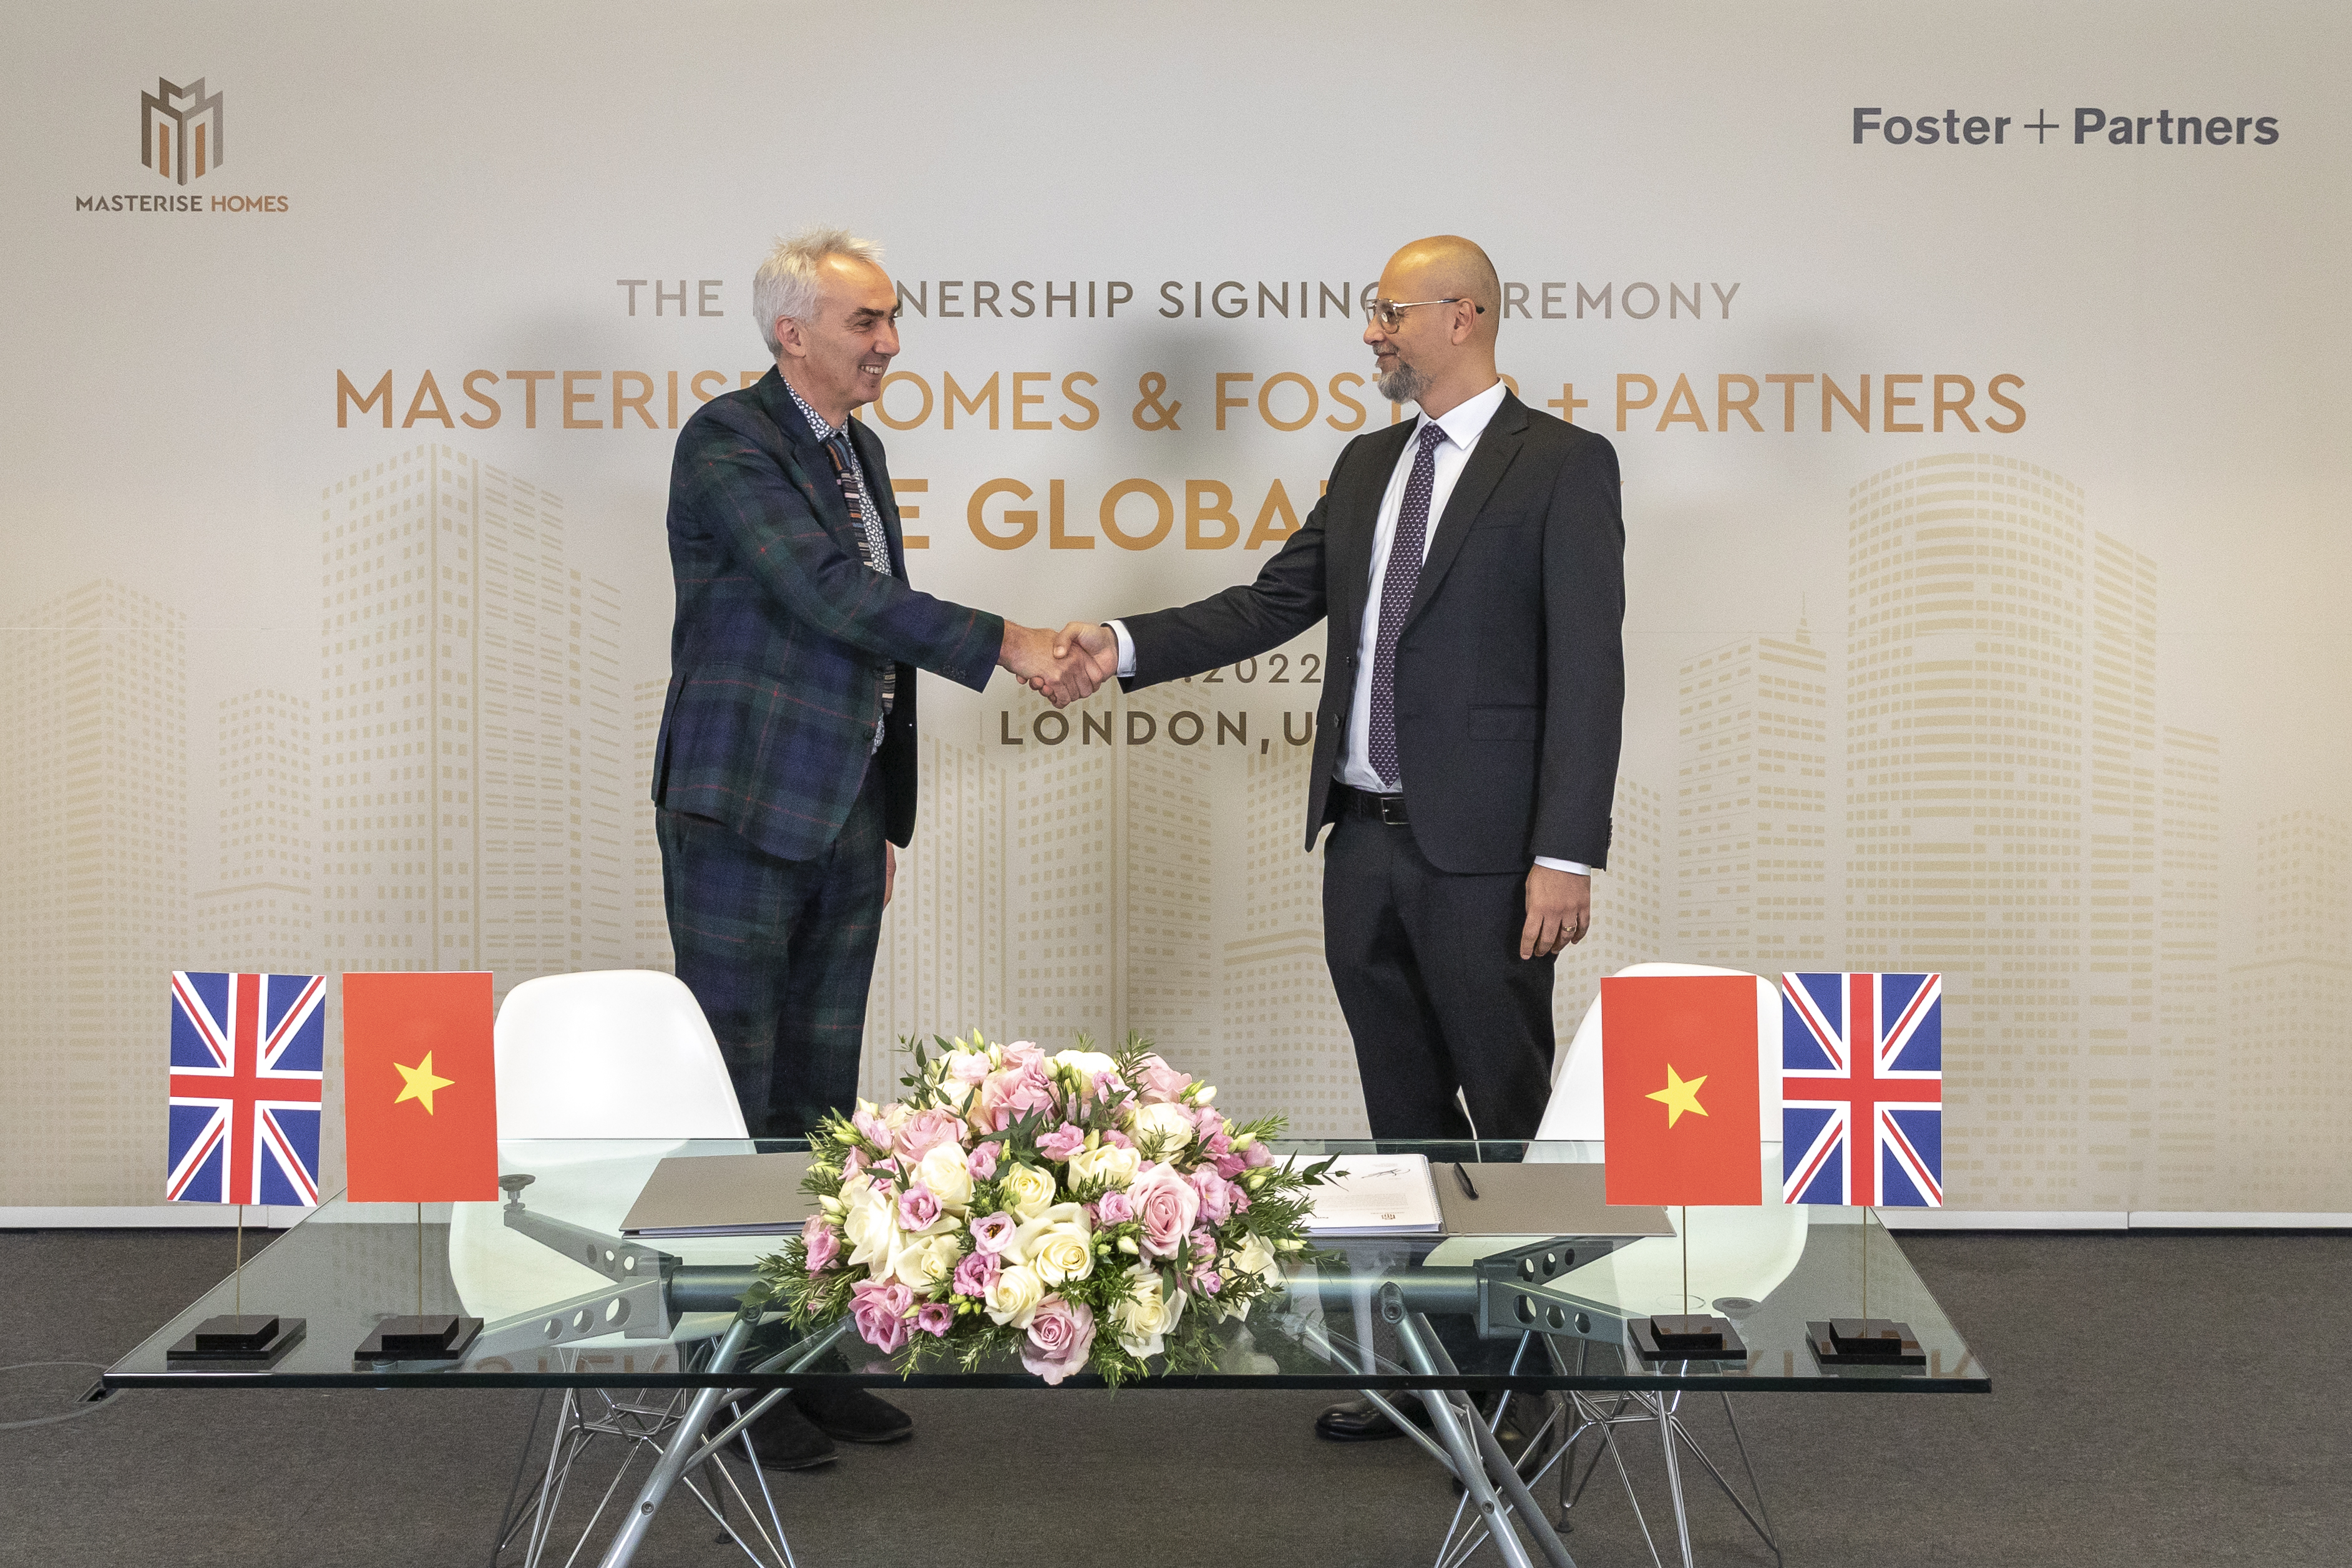 Masterise Homes forms strategic partnership with Foster + Partners to develop ‘The Global City’ in Ho Chi Minh City